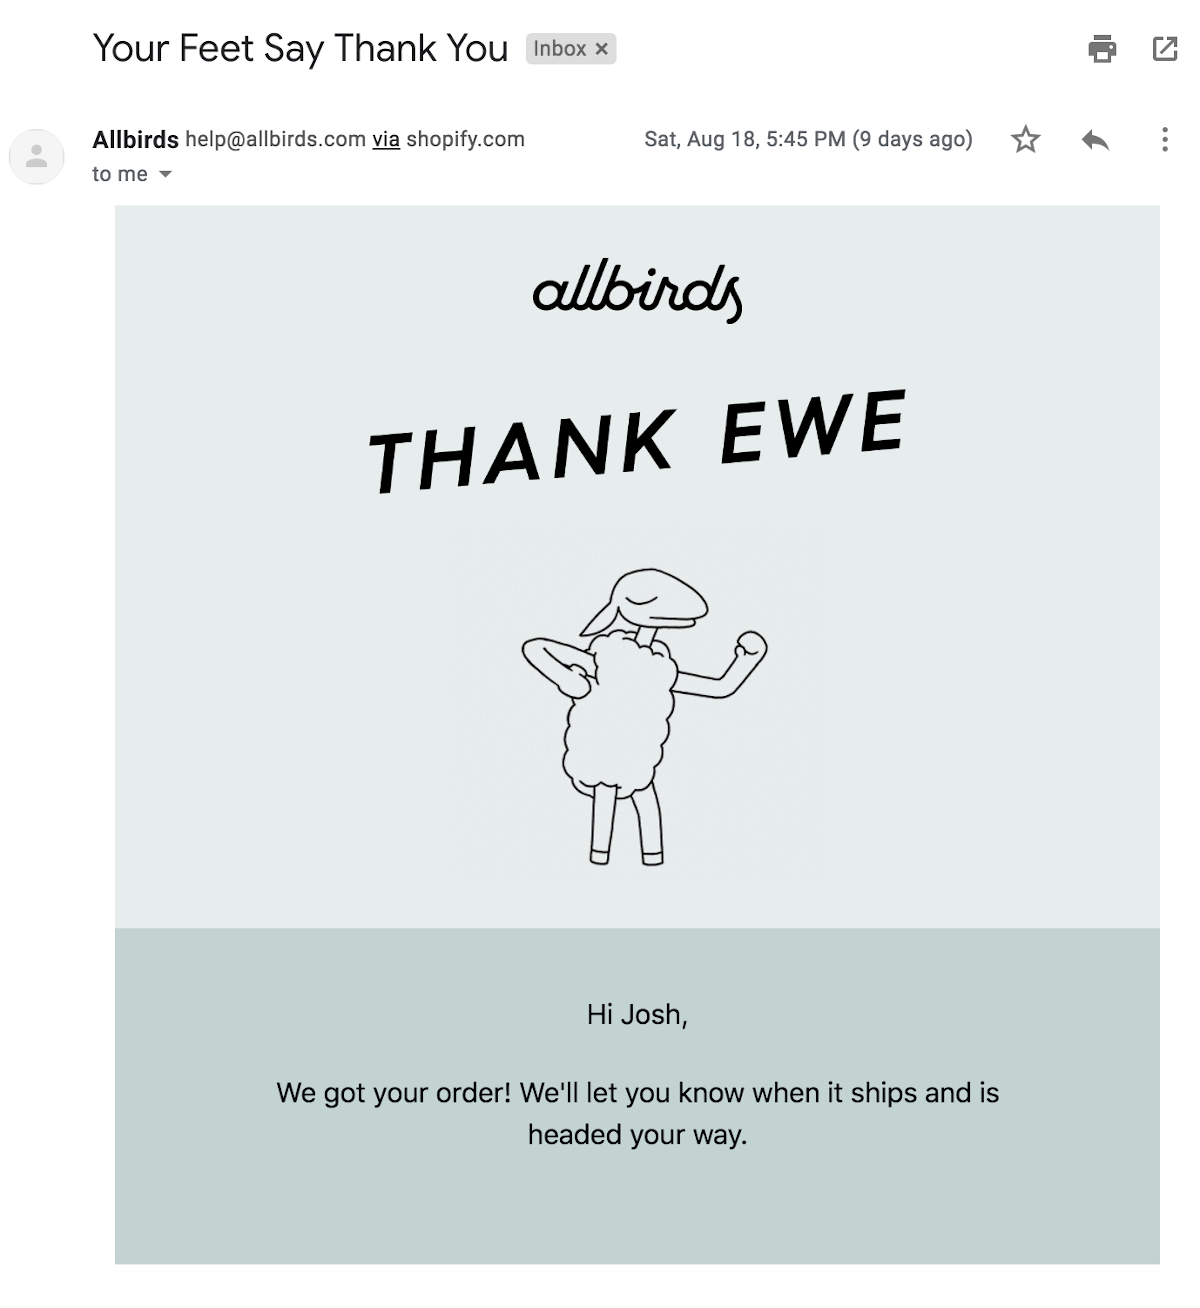 allbirds-thank-you-email